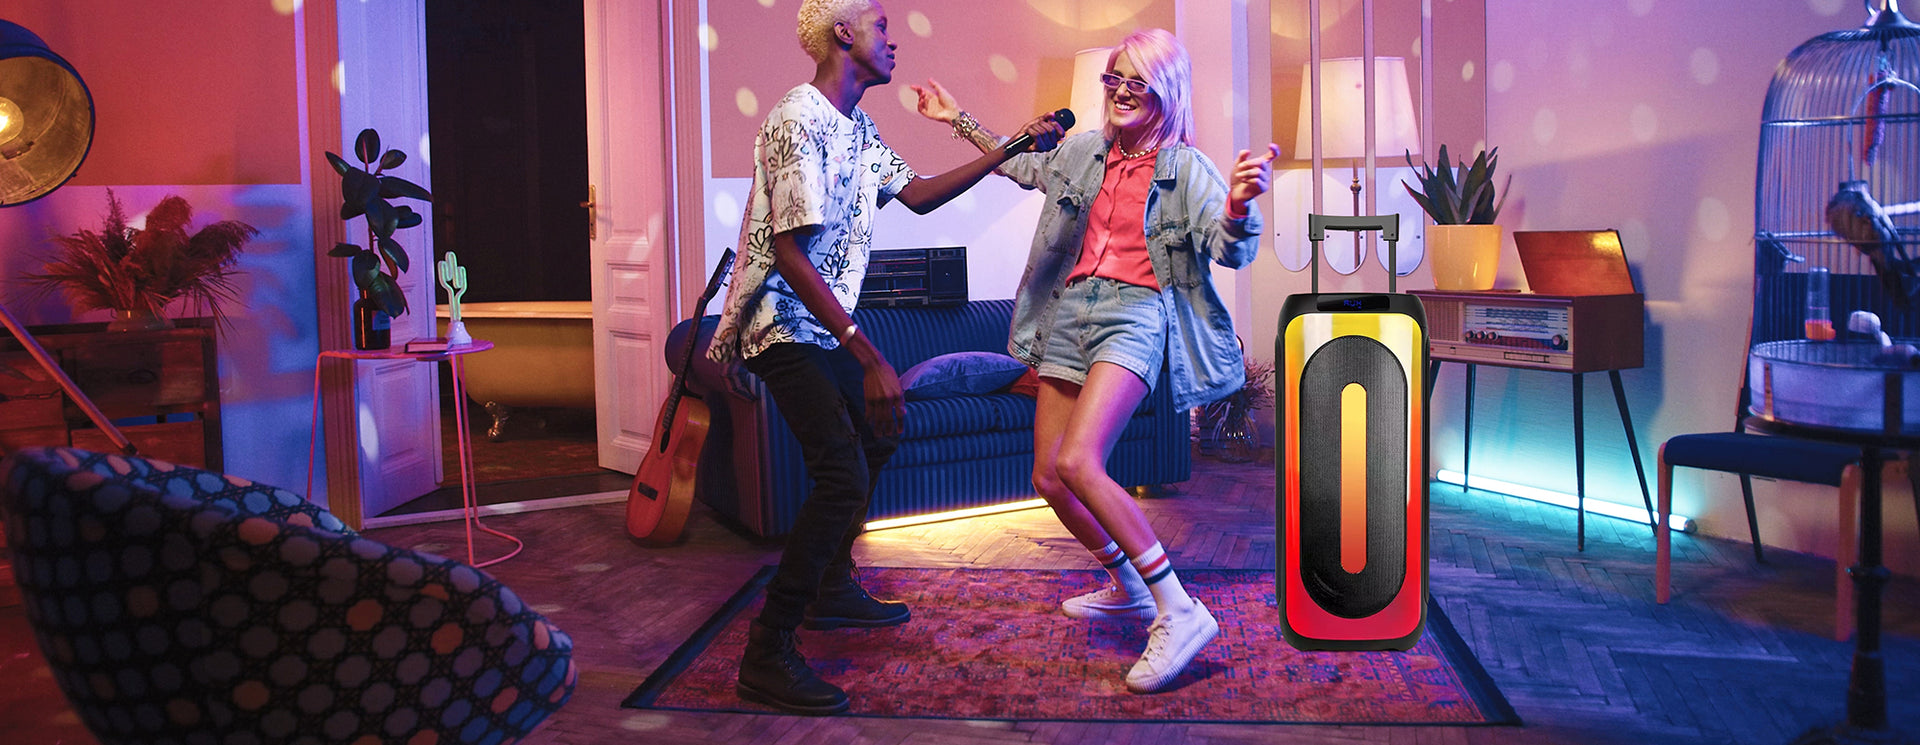 Young man and lady dancing in the living room with a party speaker and lights